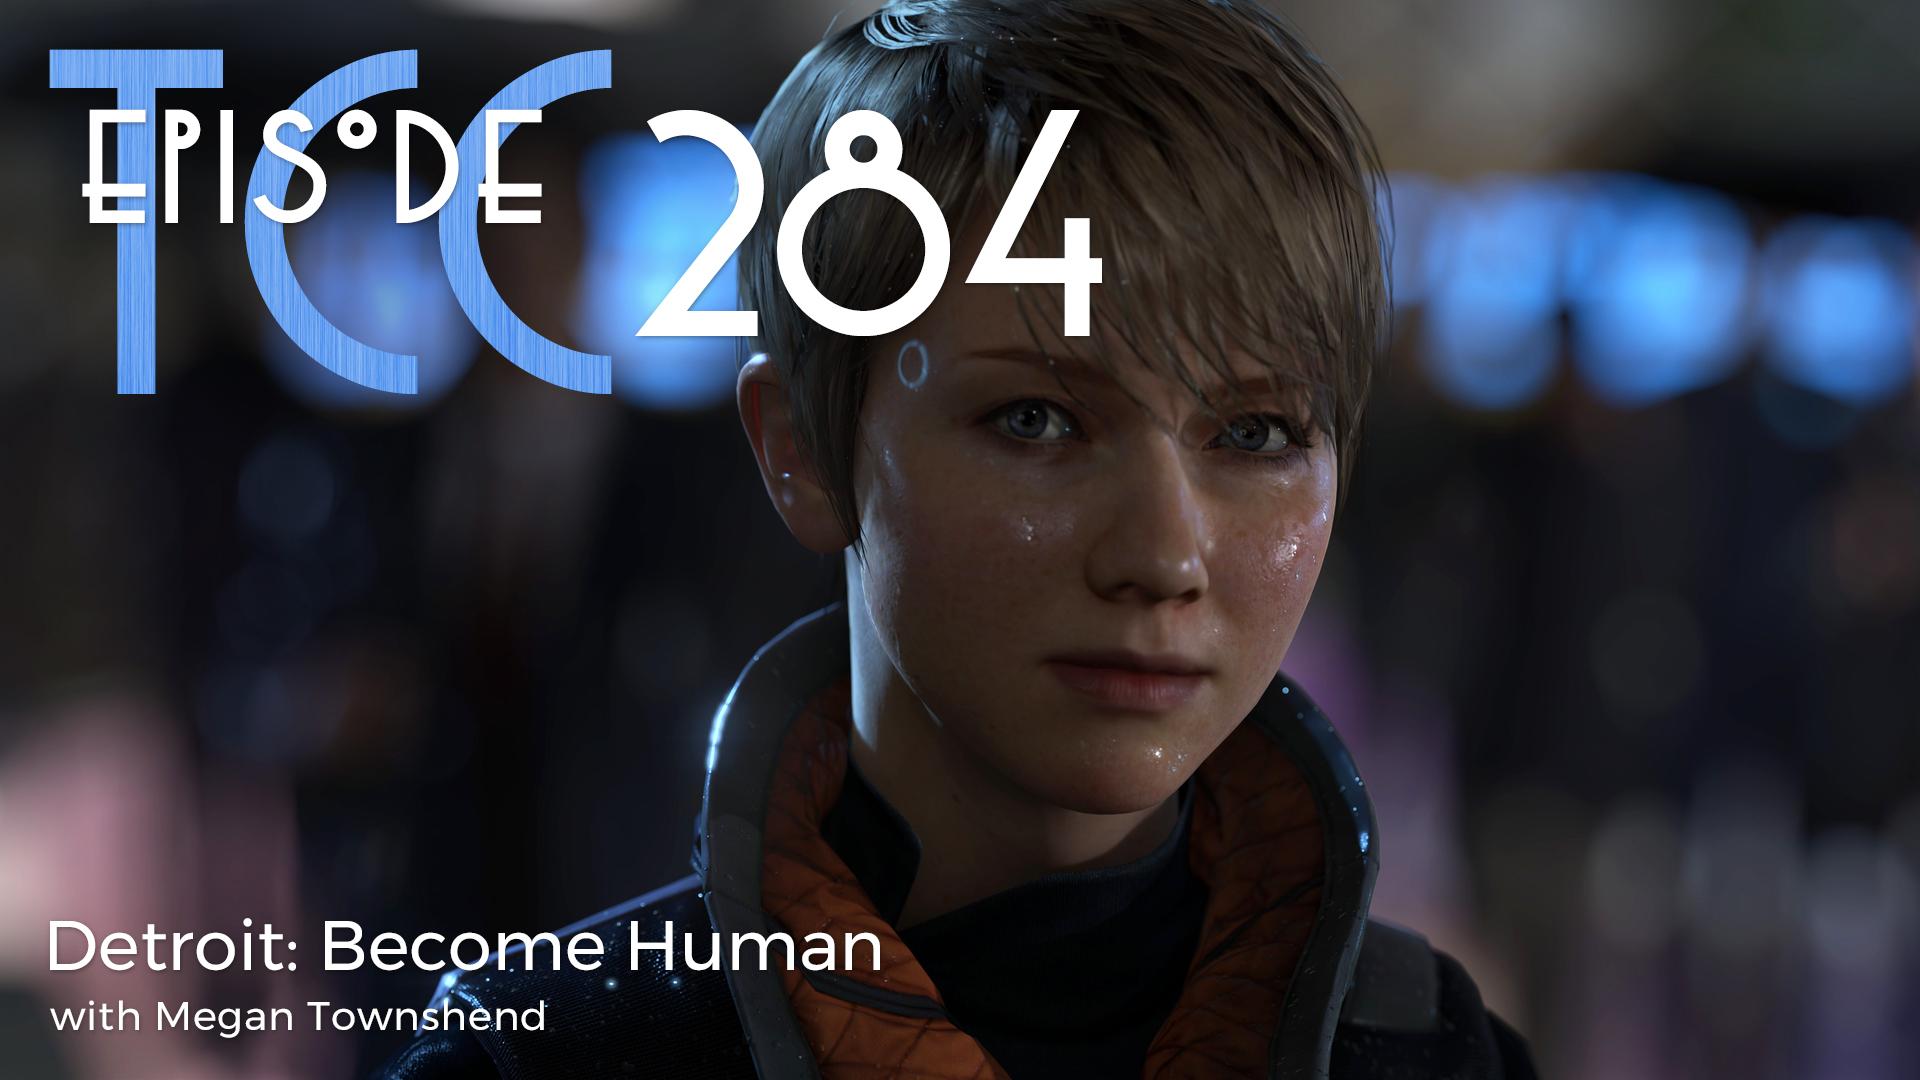 The Citadel Cafe 284: Detroit Become Human